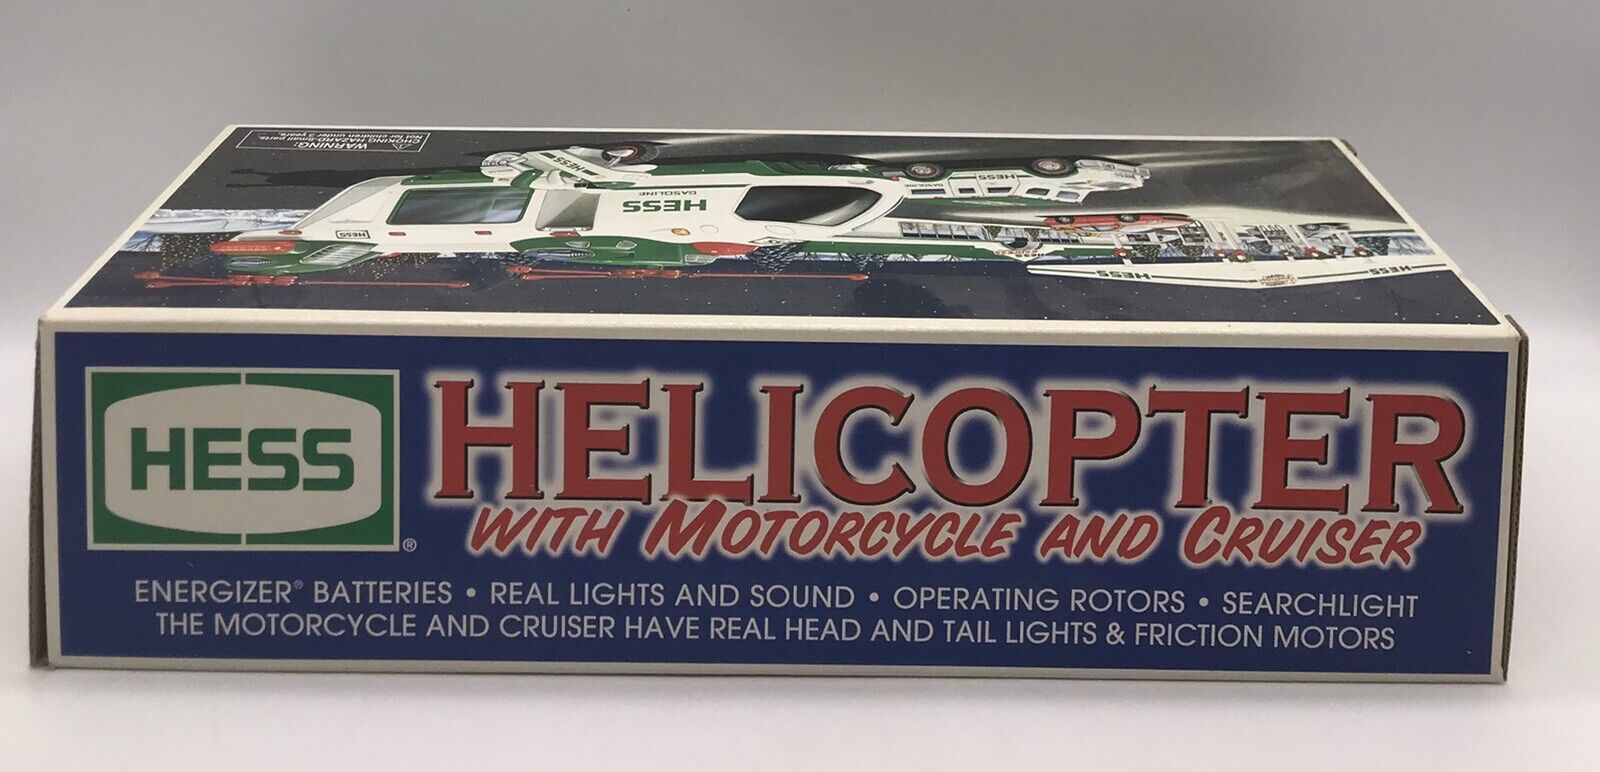 2001 Hess Toy Helicopter with Motorcycle and Cruiser